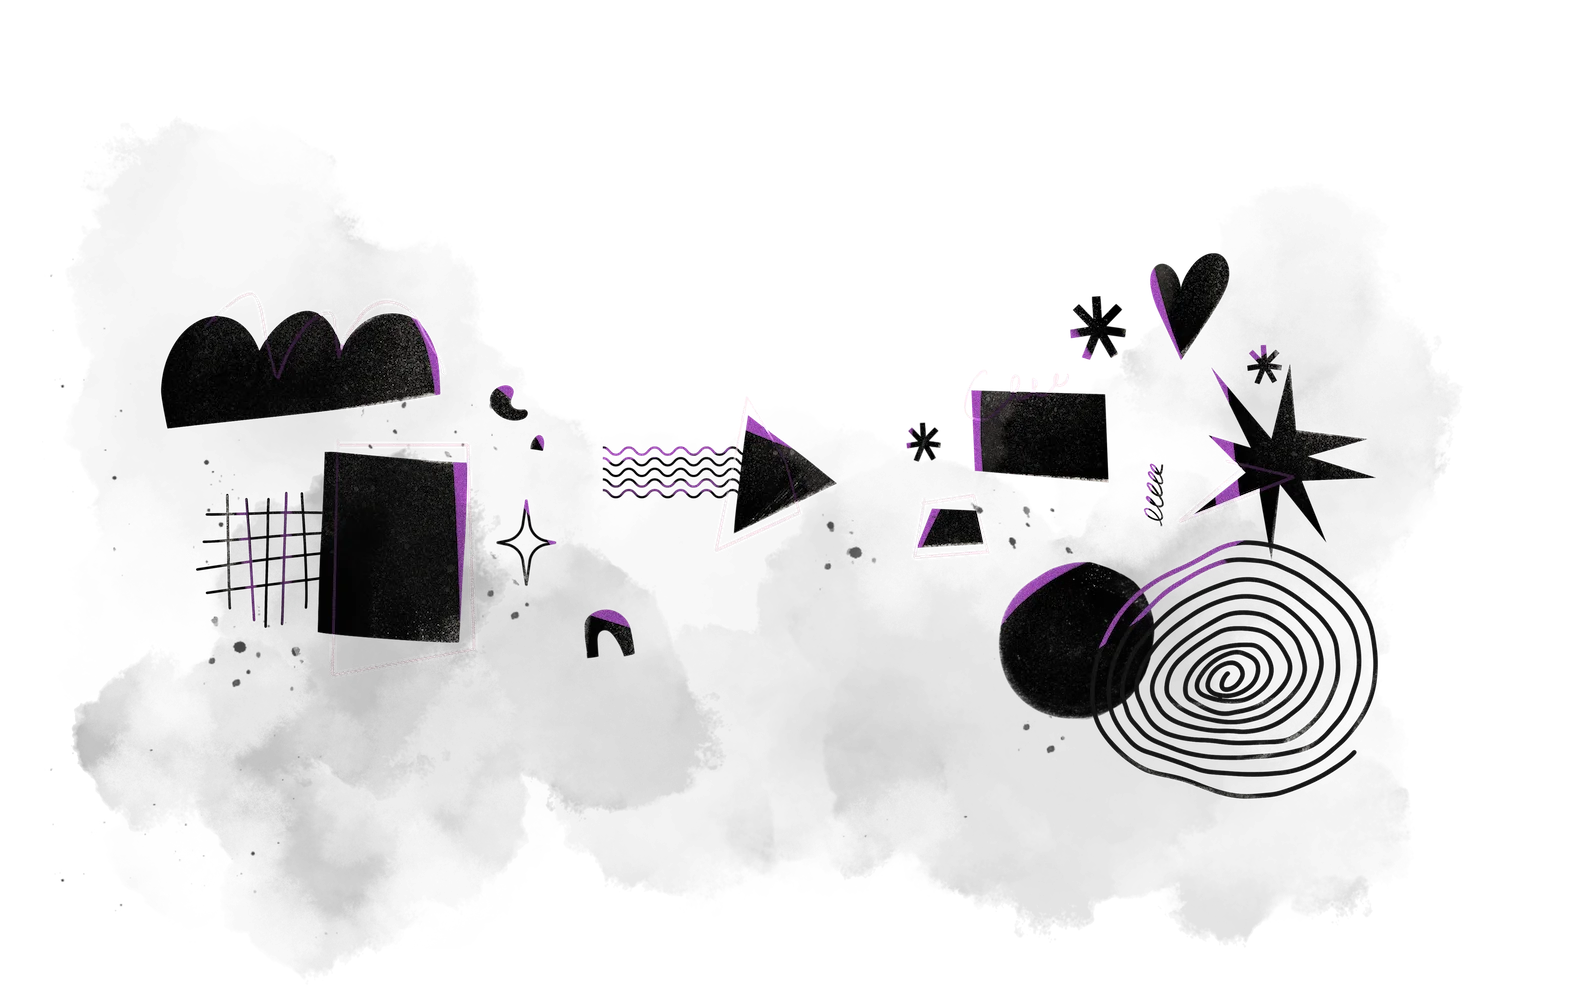 A playful depiction of gray, black and purple shapes